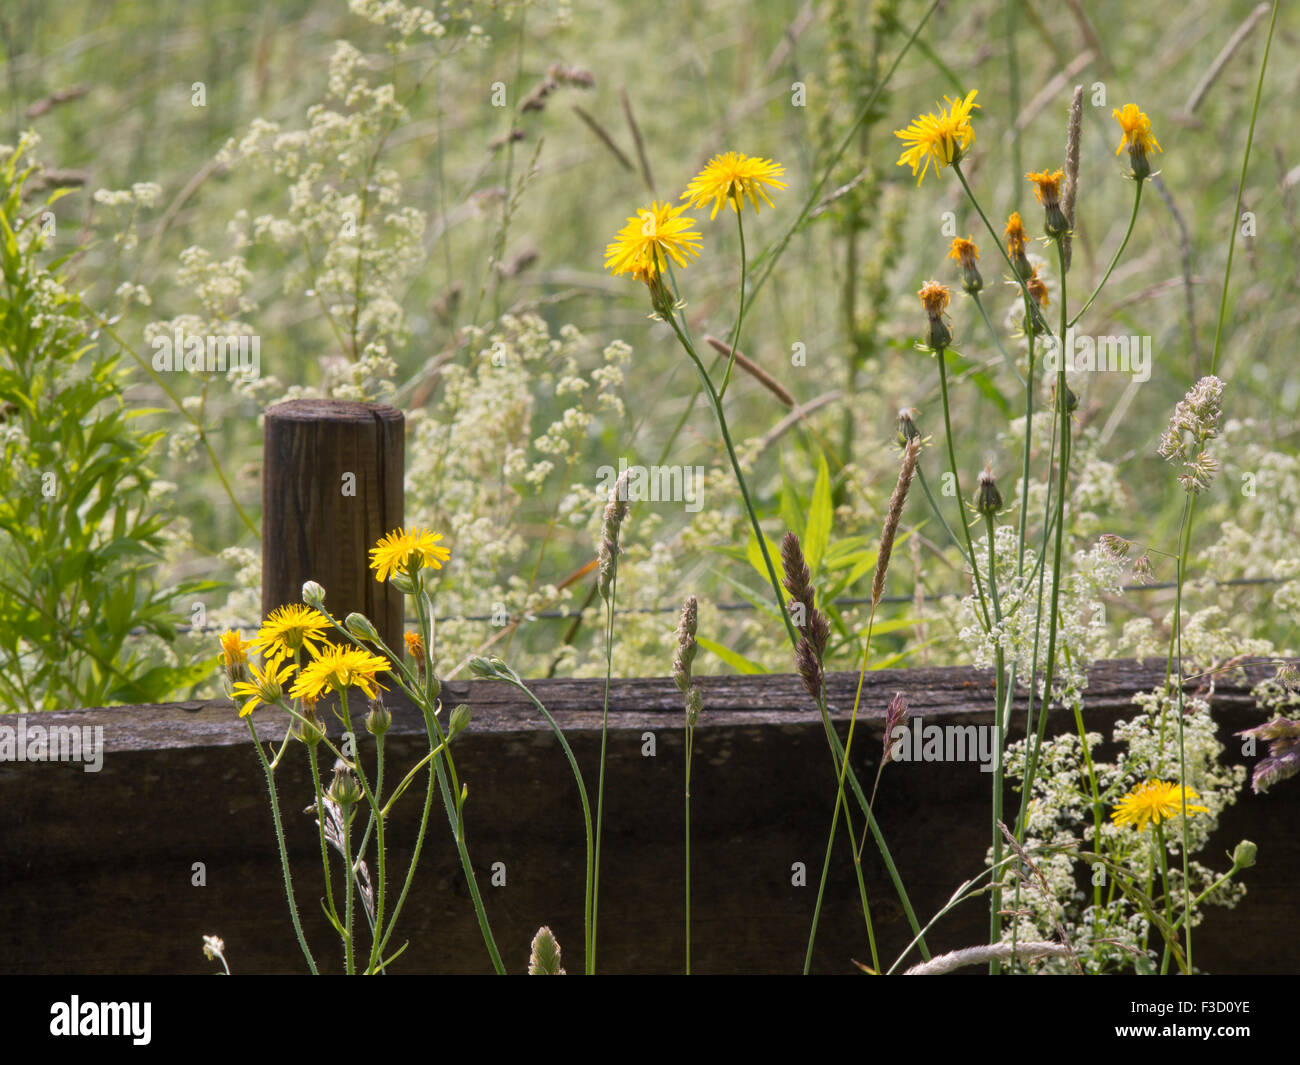 Impressions of summer, romantic and idyllic meadow with yellow and white flowers, looking over a brown wooden fence Stock Photo